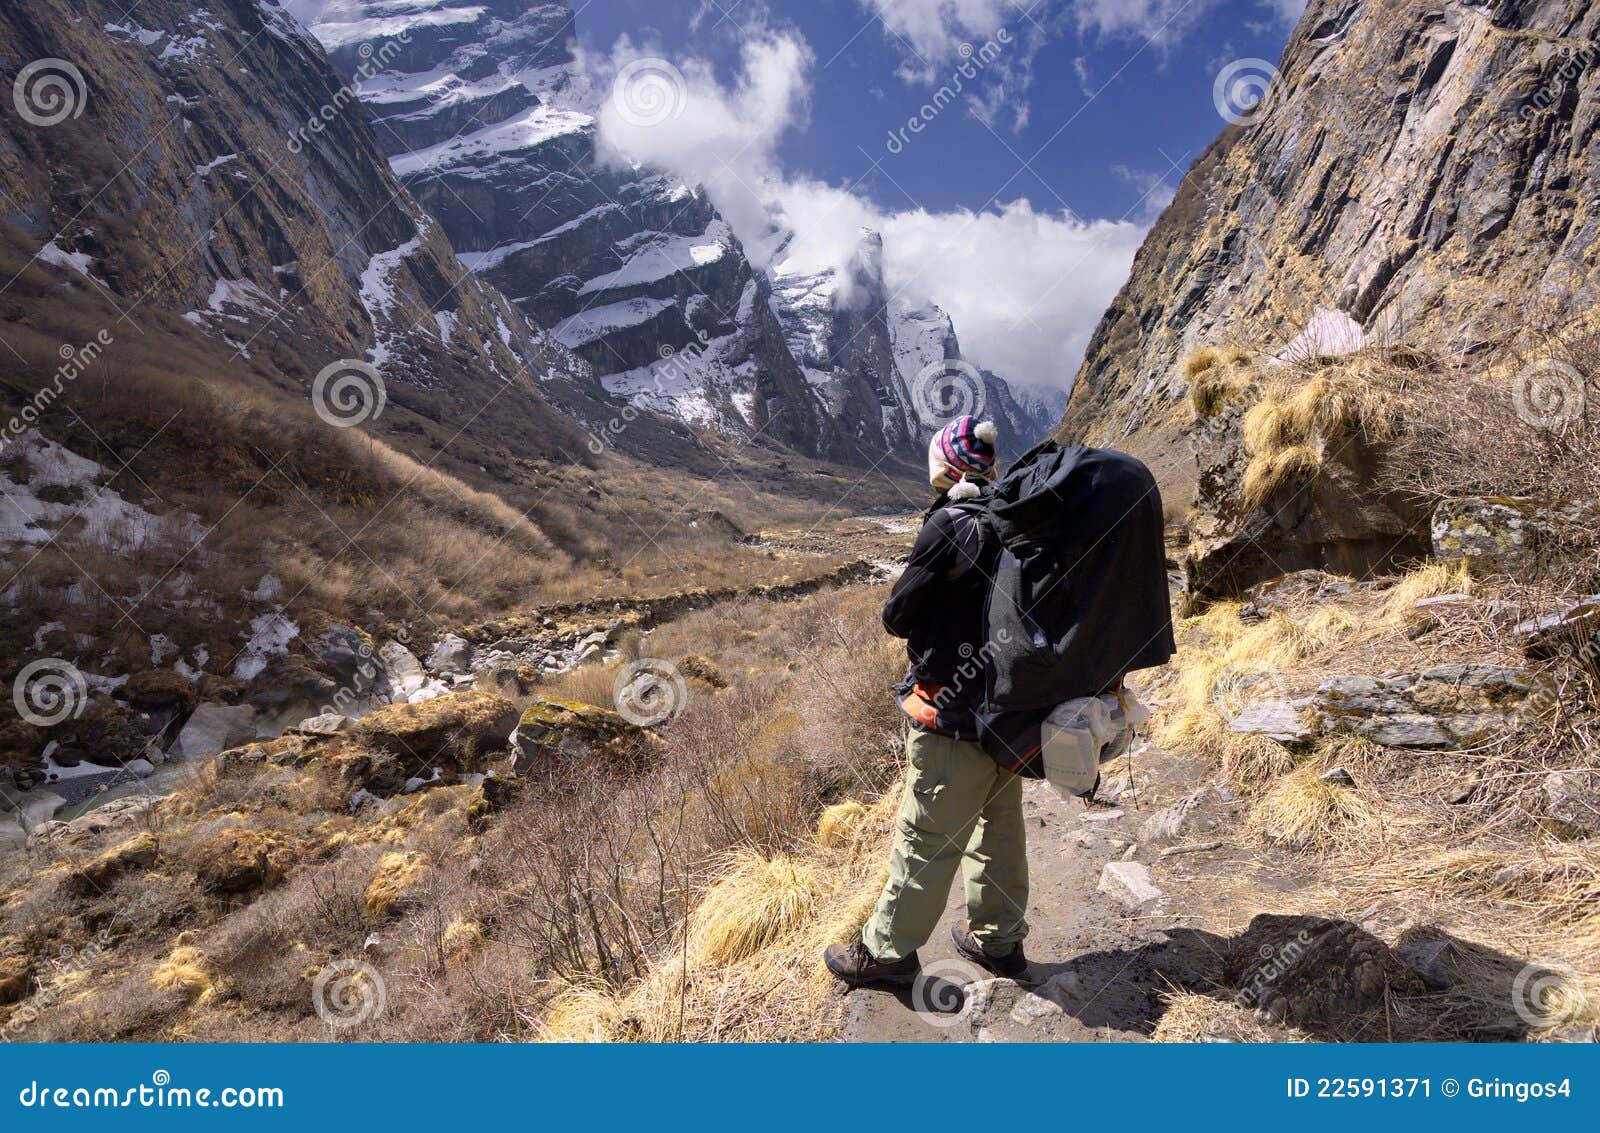 nepali guide standing in the modi khola valley